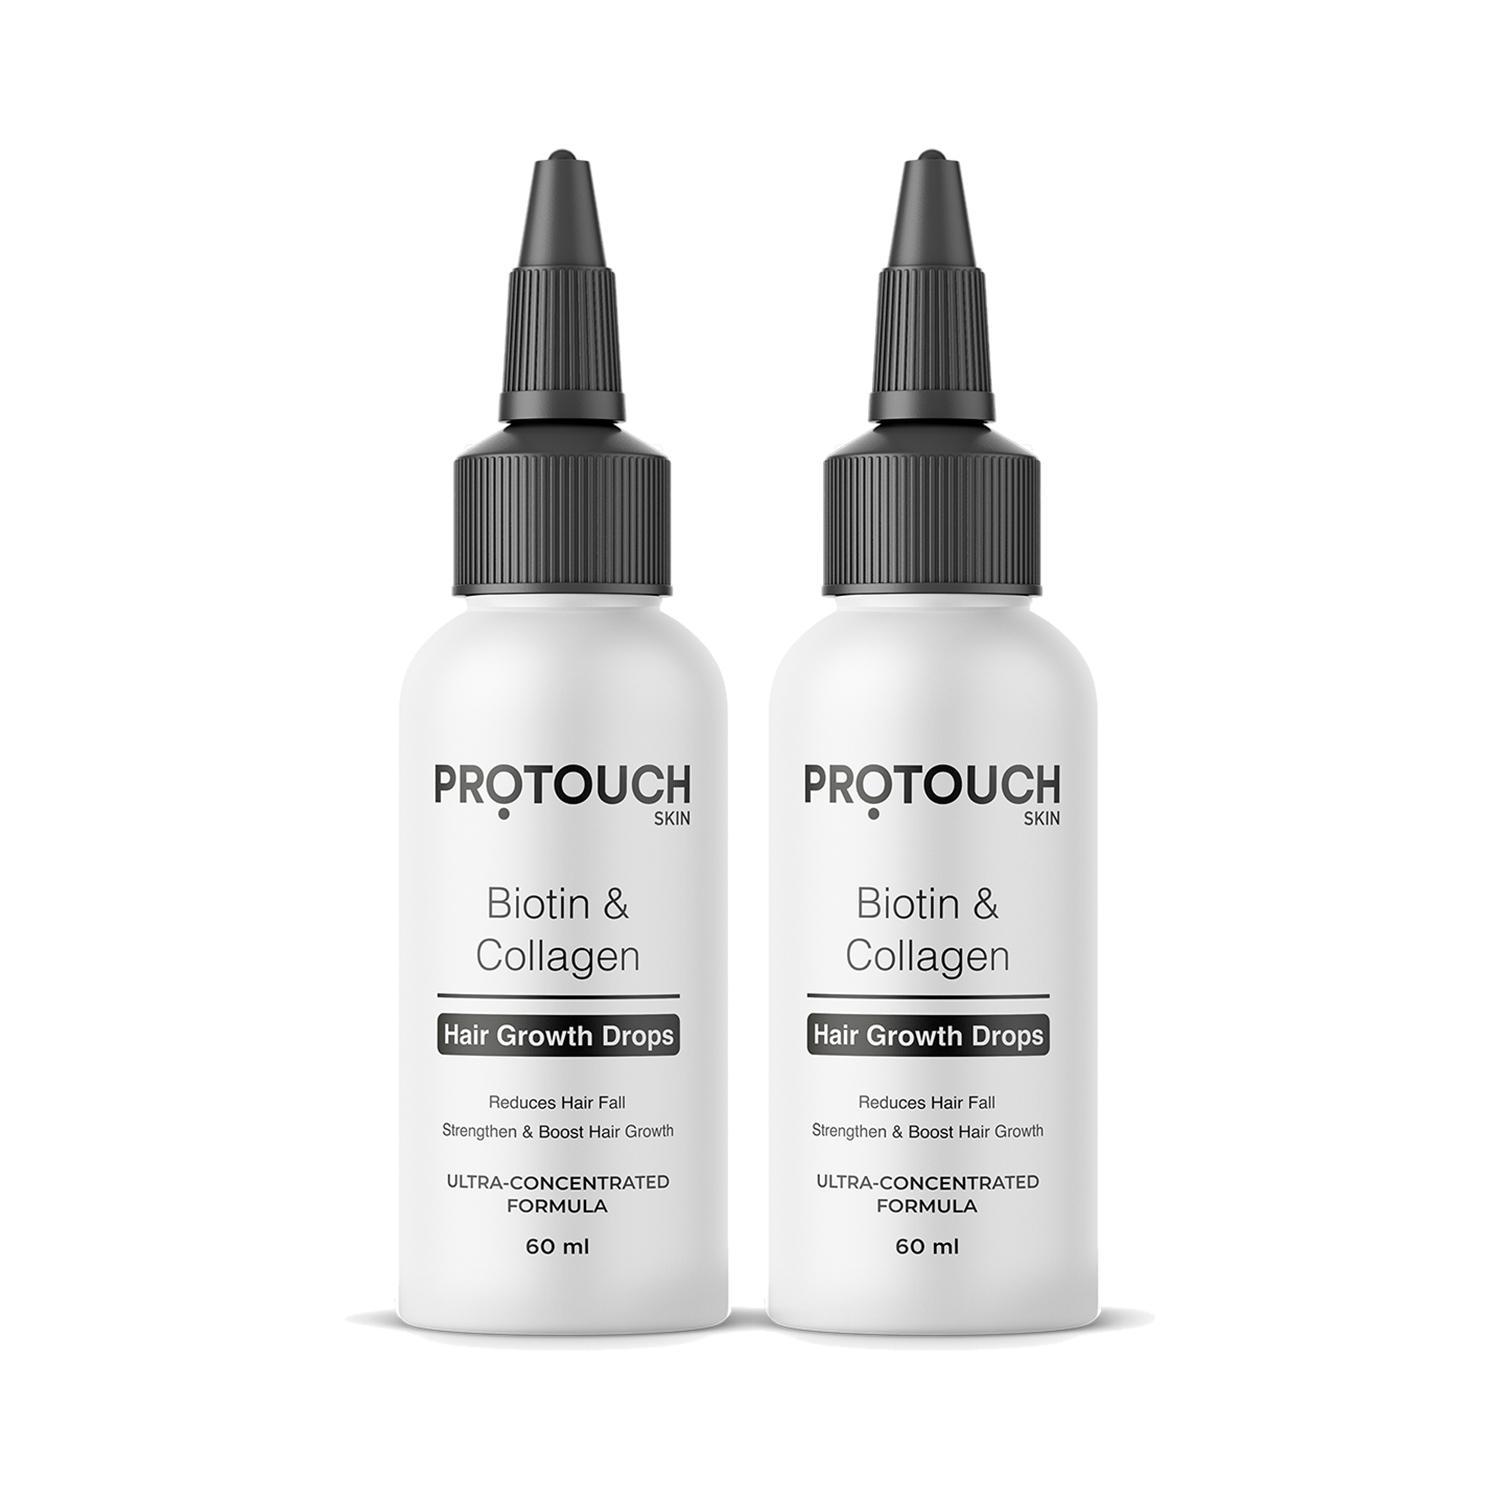 protouch advanced biotin & collagen hair growth serum for men & women - (pack of 2) combo